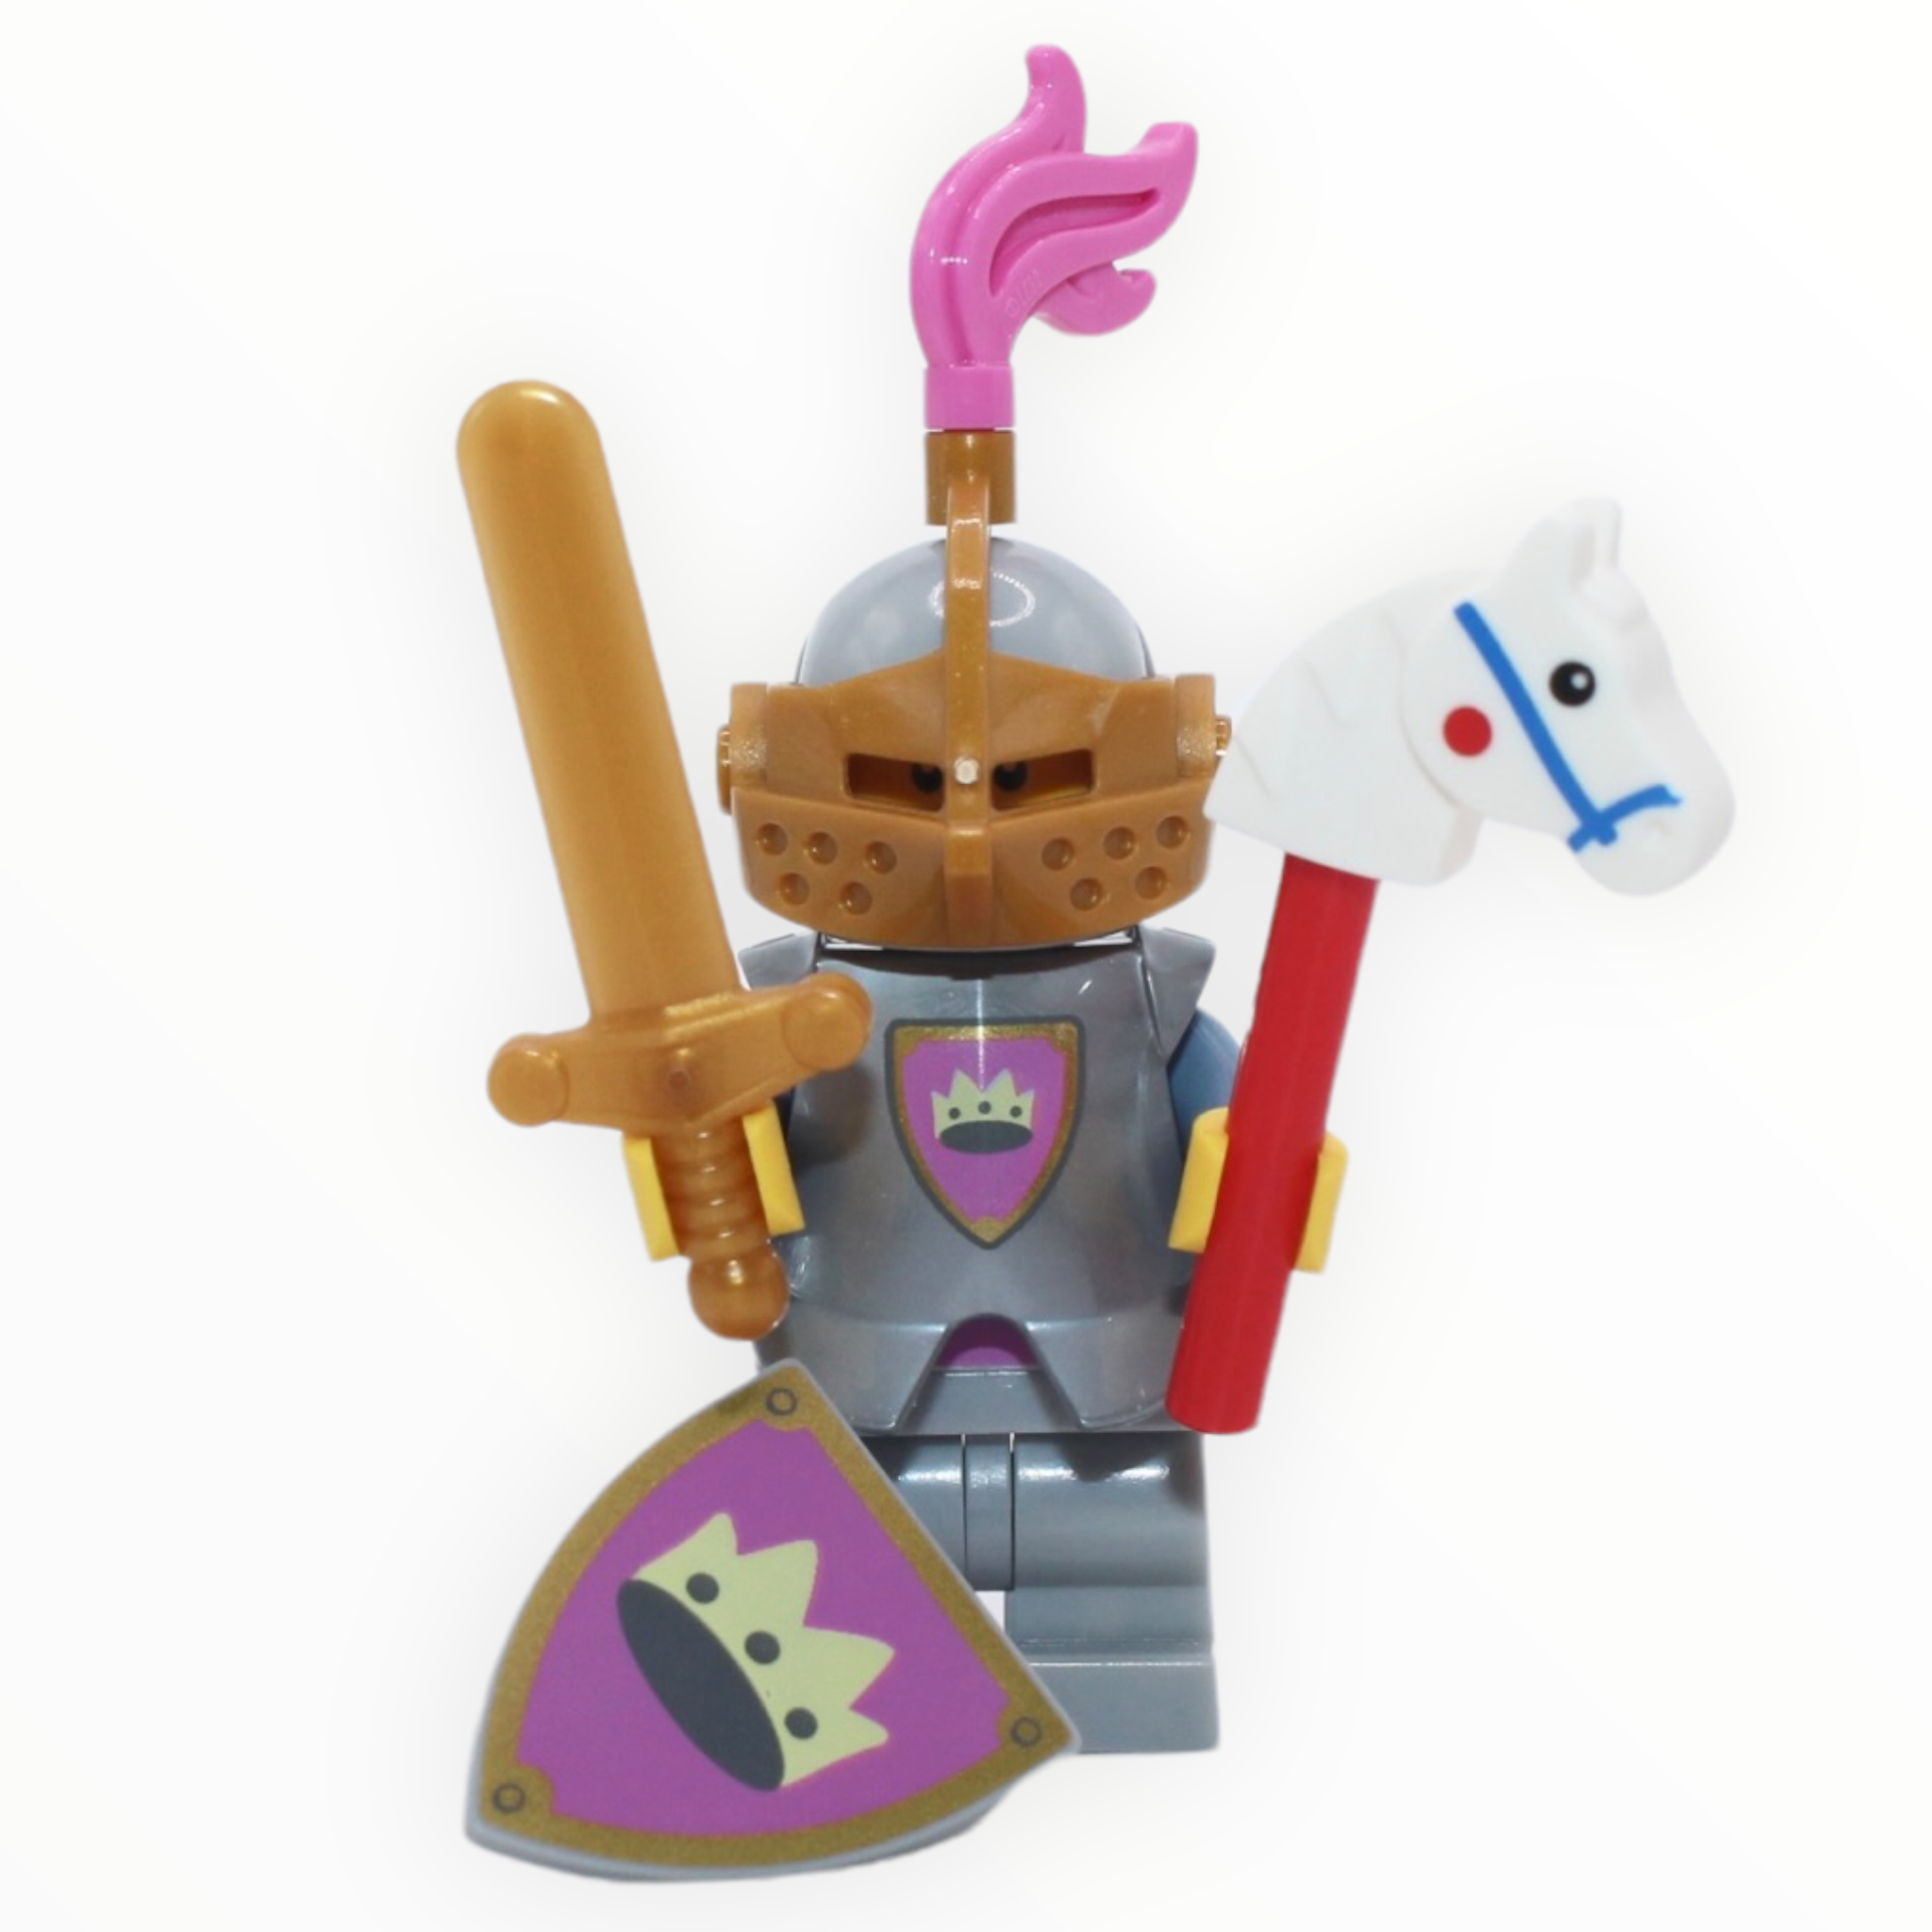 LEGO Series 23: Knight of the Yellow Castle